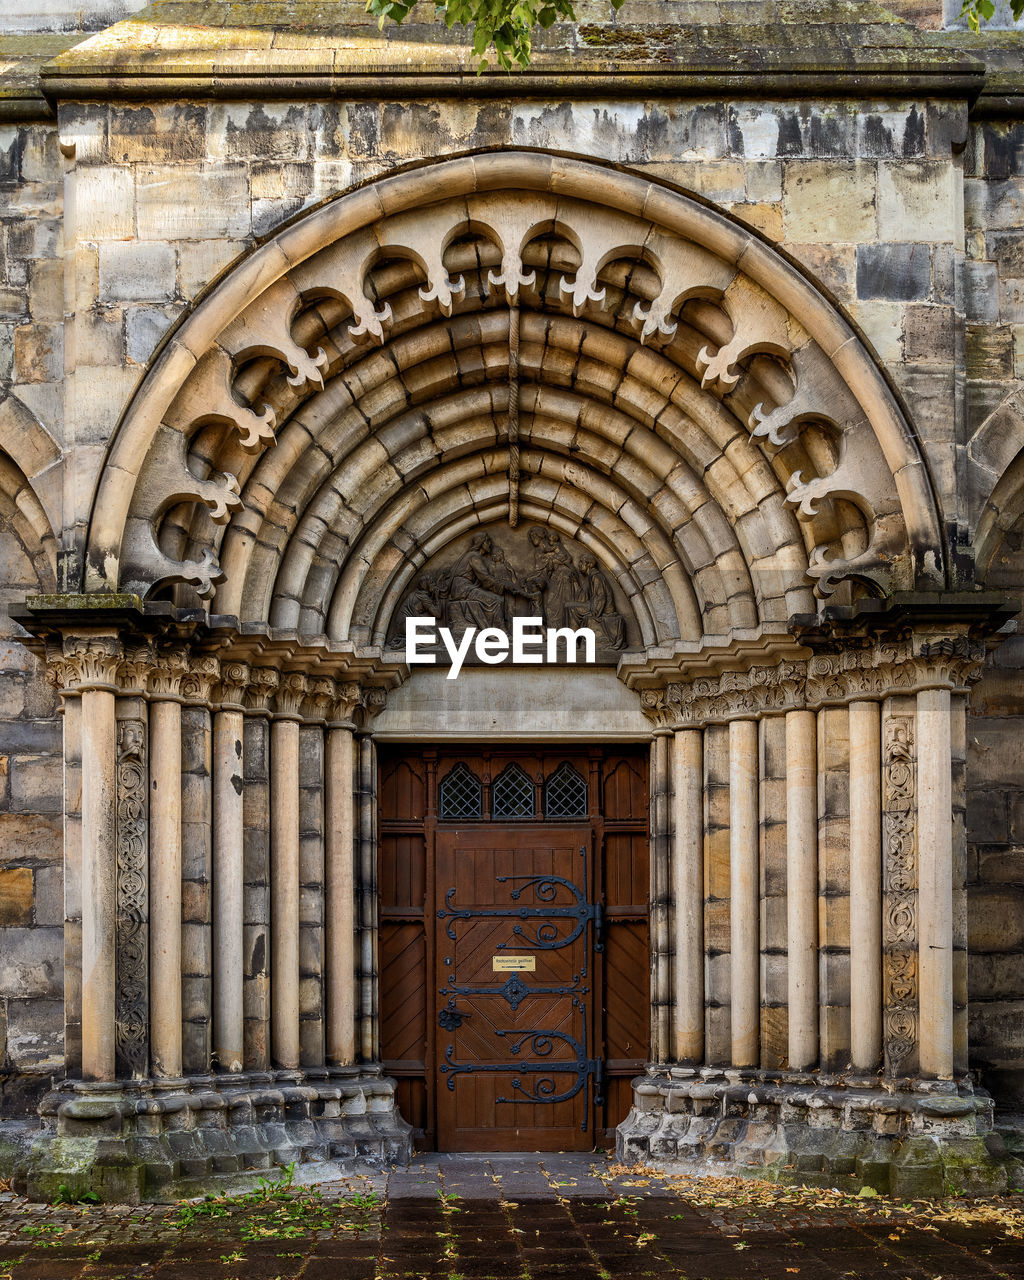 Entrance portico to old church in hamelin, lower saxony, germany